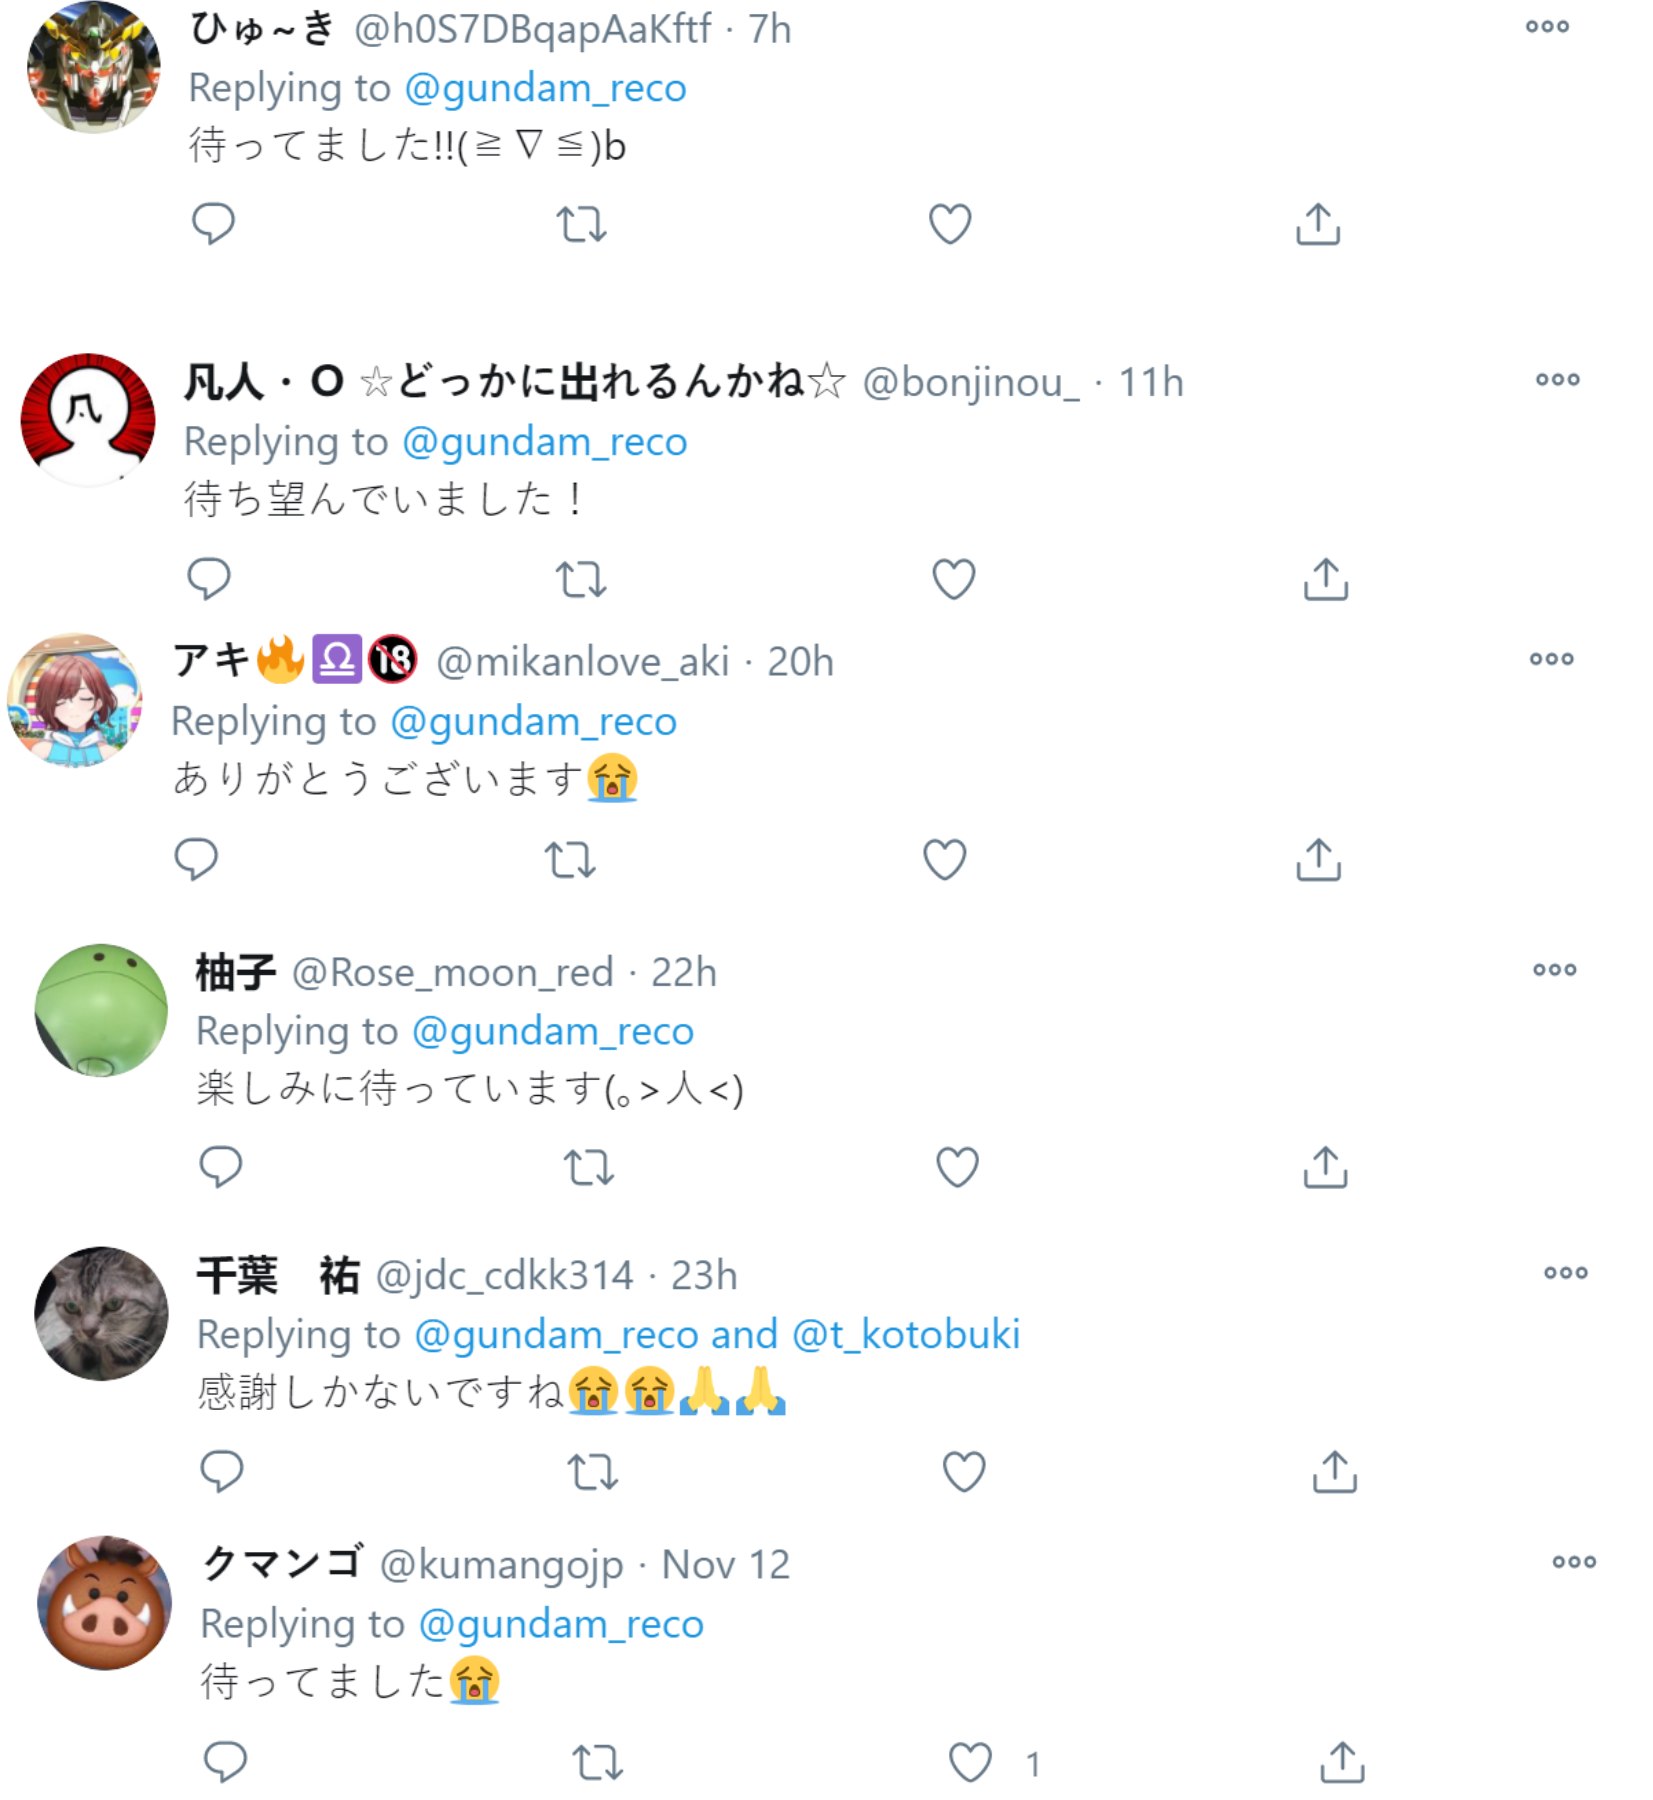 Gundam Reconguista 2021 2 - twitter comments about g-reco